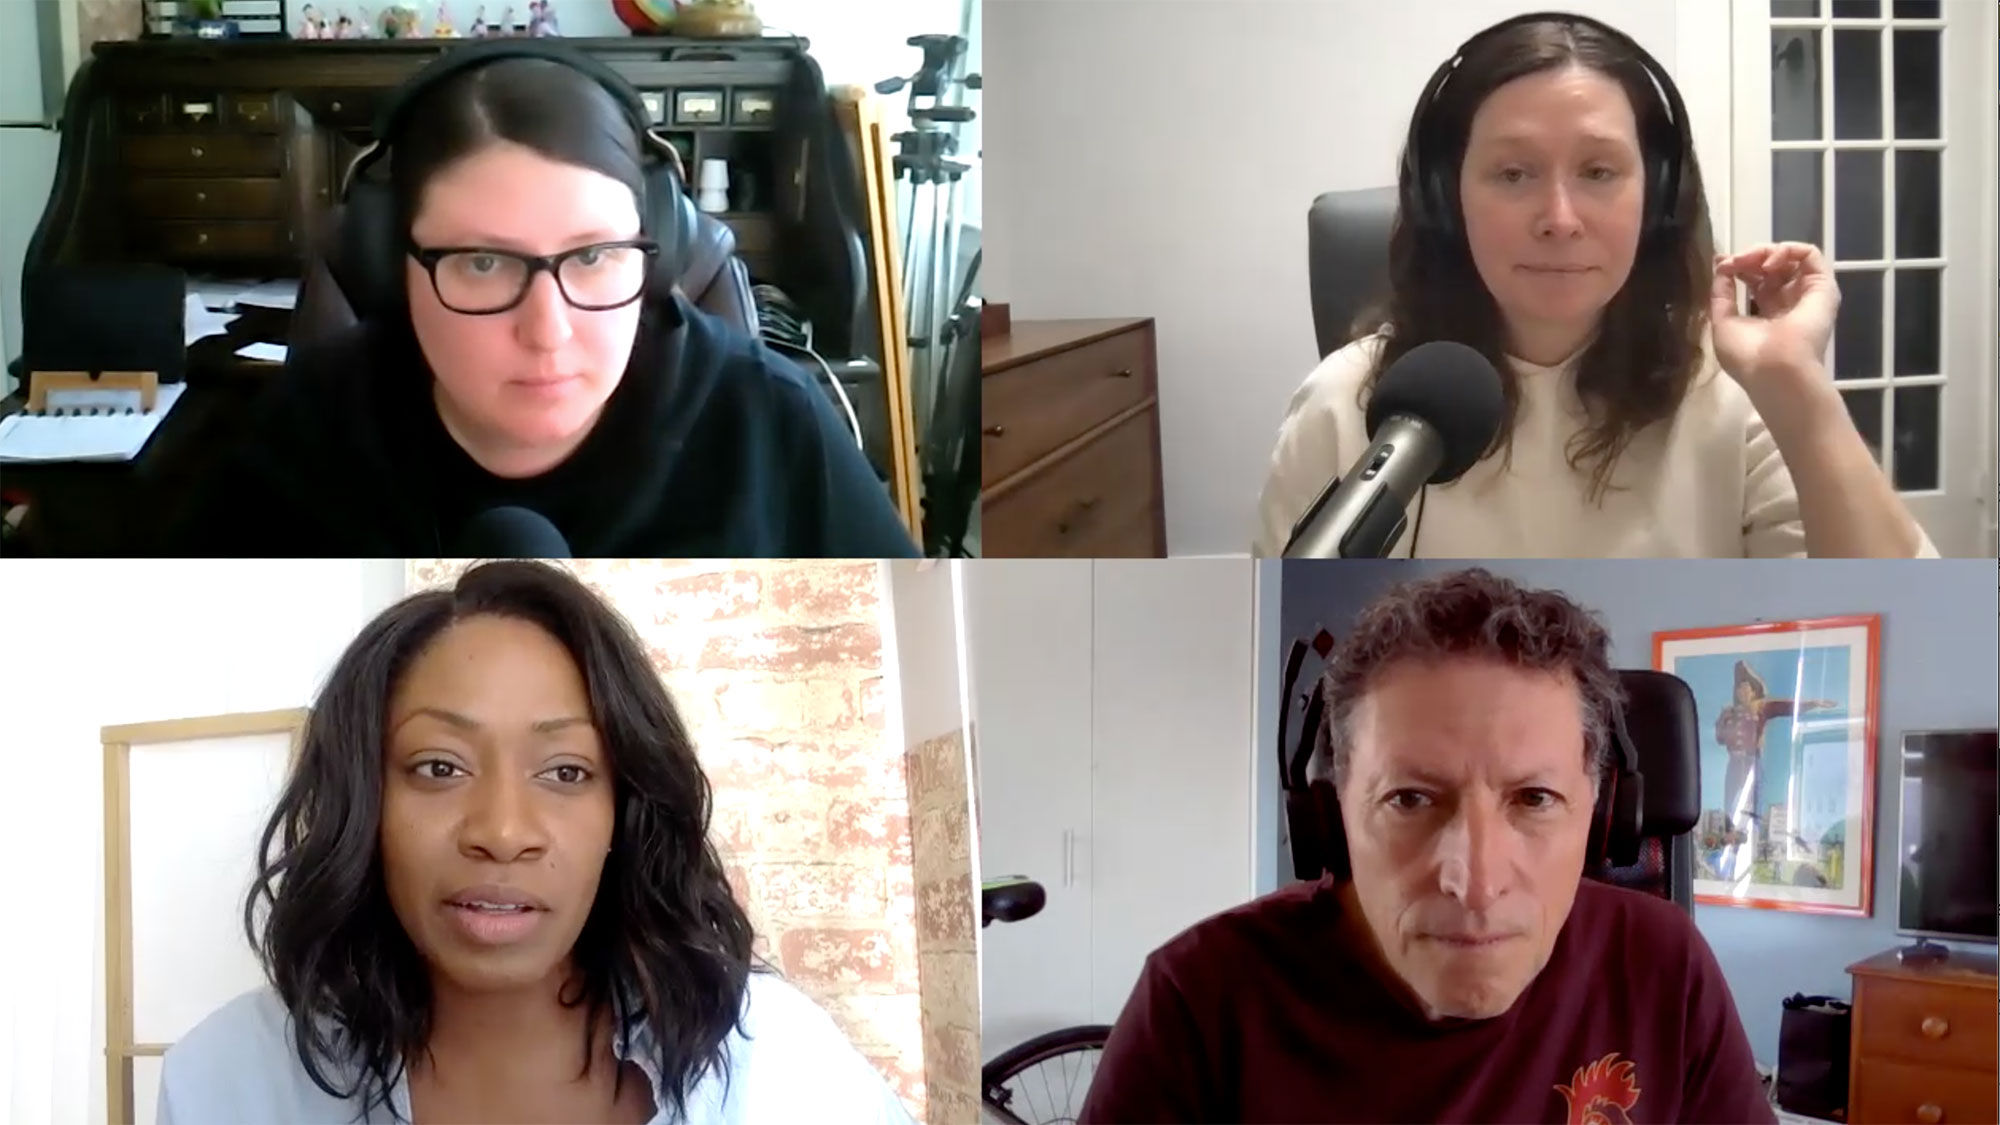 Travel Weekly reporters and editors Jamie Biesiada, Rebecca Tobin, Arnie Weissmann and Nicole Edenedo on a Folo by Travel Weekly podcast episode about the Russian invasion of Ukraine.